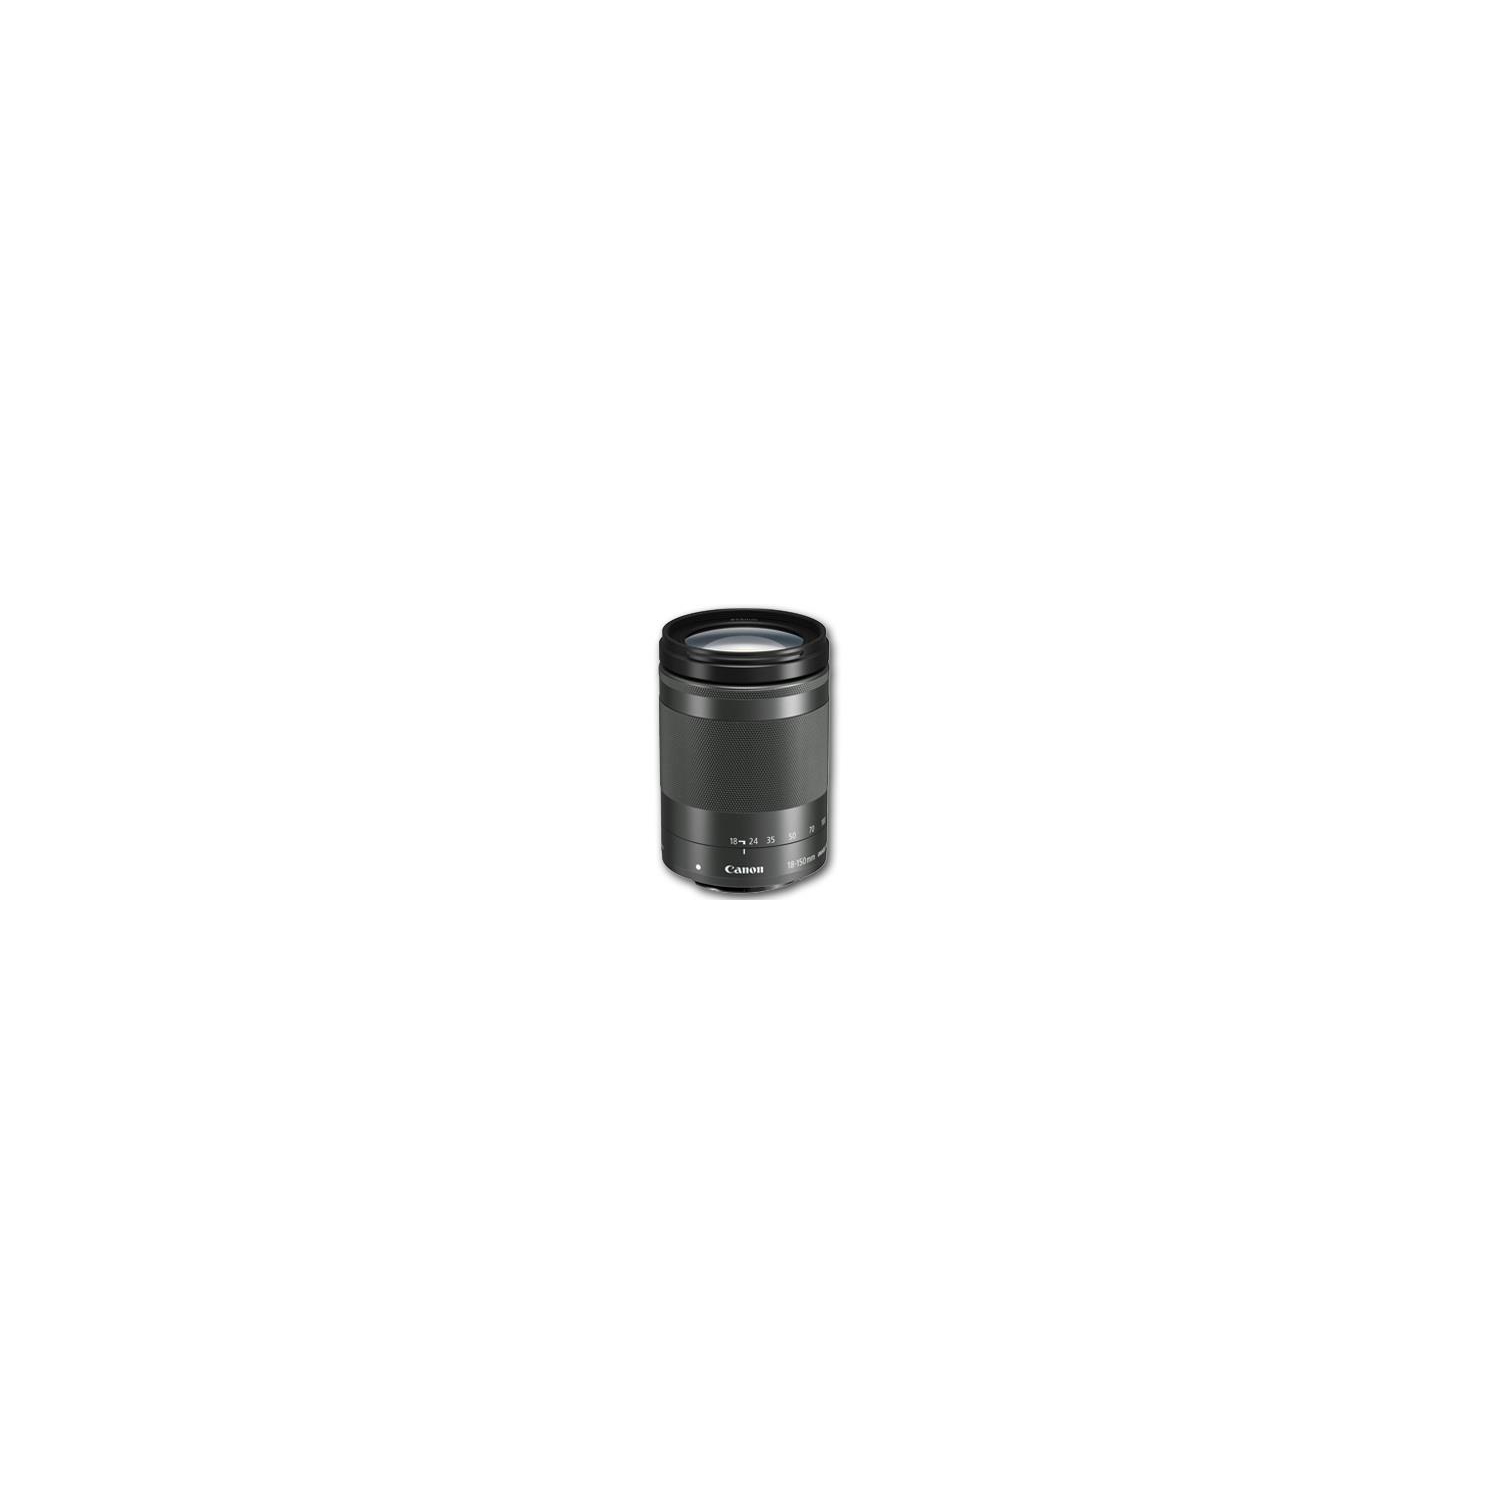 Canon EF-M 18-150mm f/3.5-6.3 IS STM Lens (Graphite) | Best Buy Canada